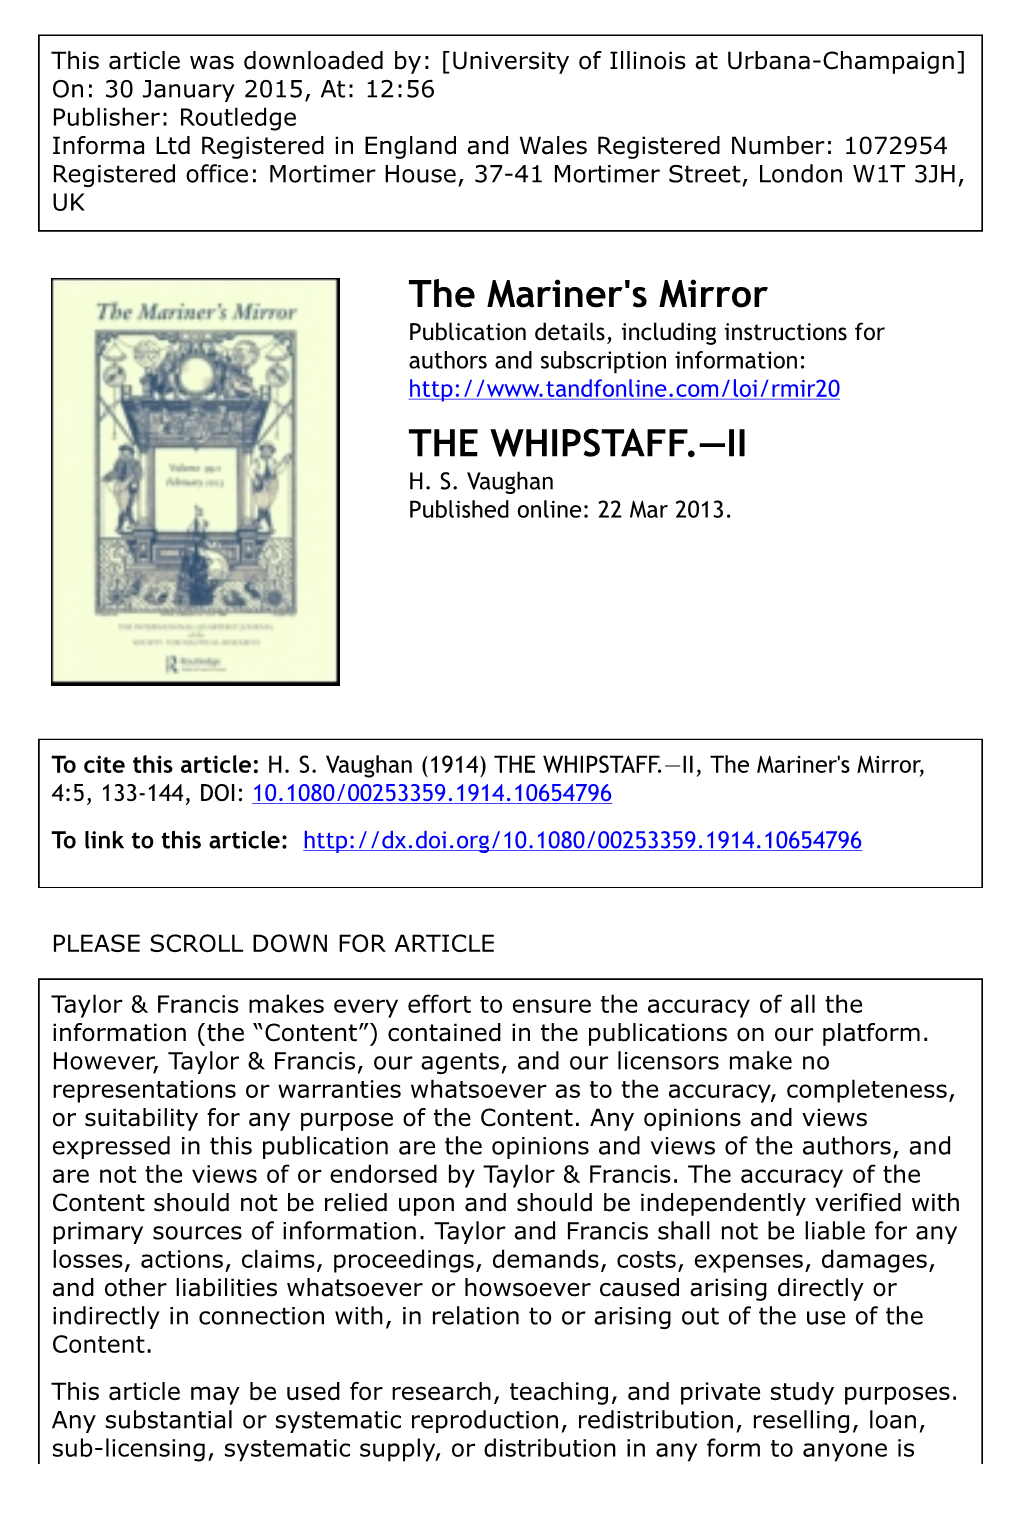 The Mariner's Mirror the WHIPSTAFF.—II